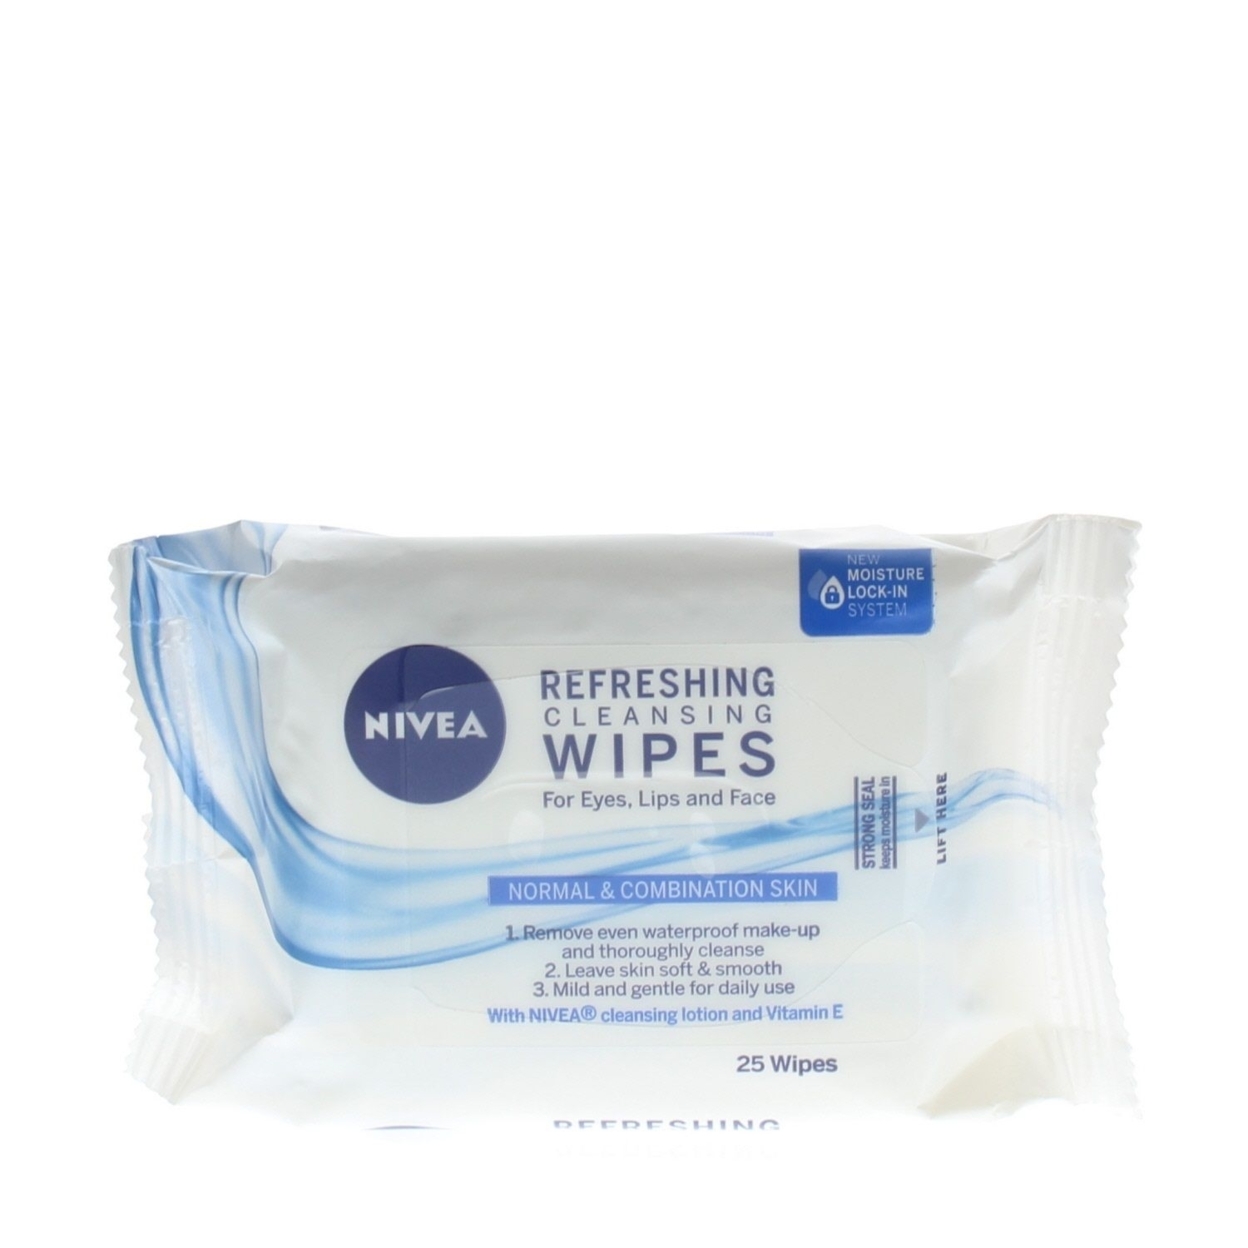 Nivea 3-In-1 Refreshing Cleansing Wipes Face Cleansing (25 Wipes)